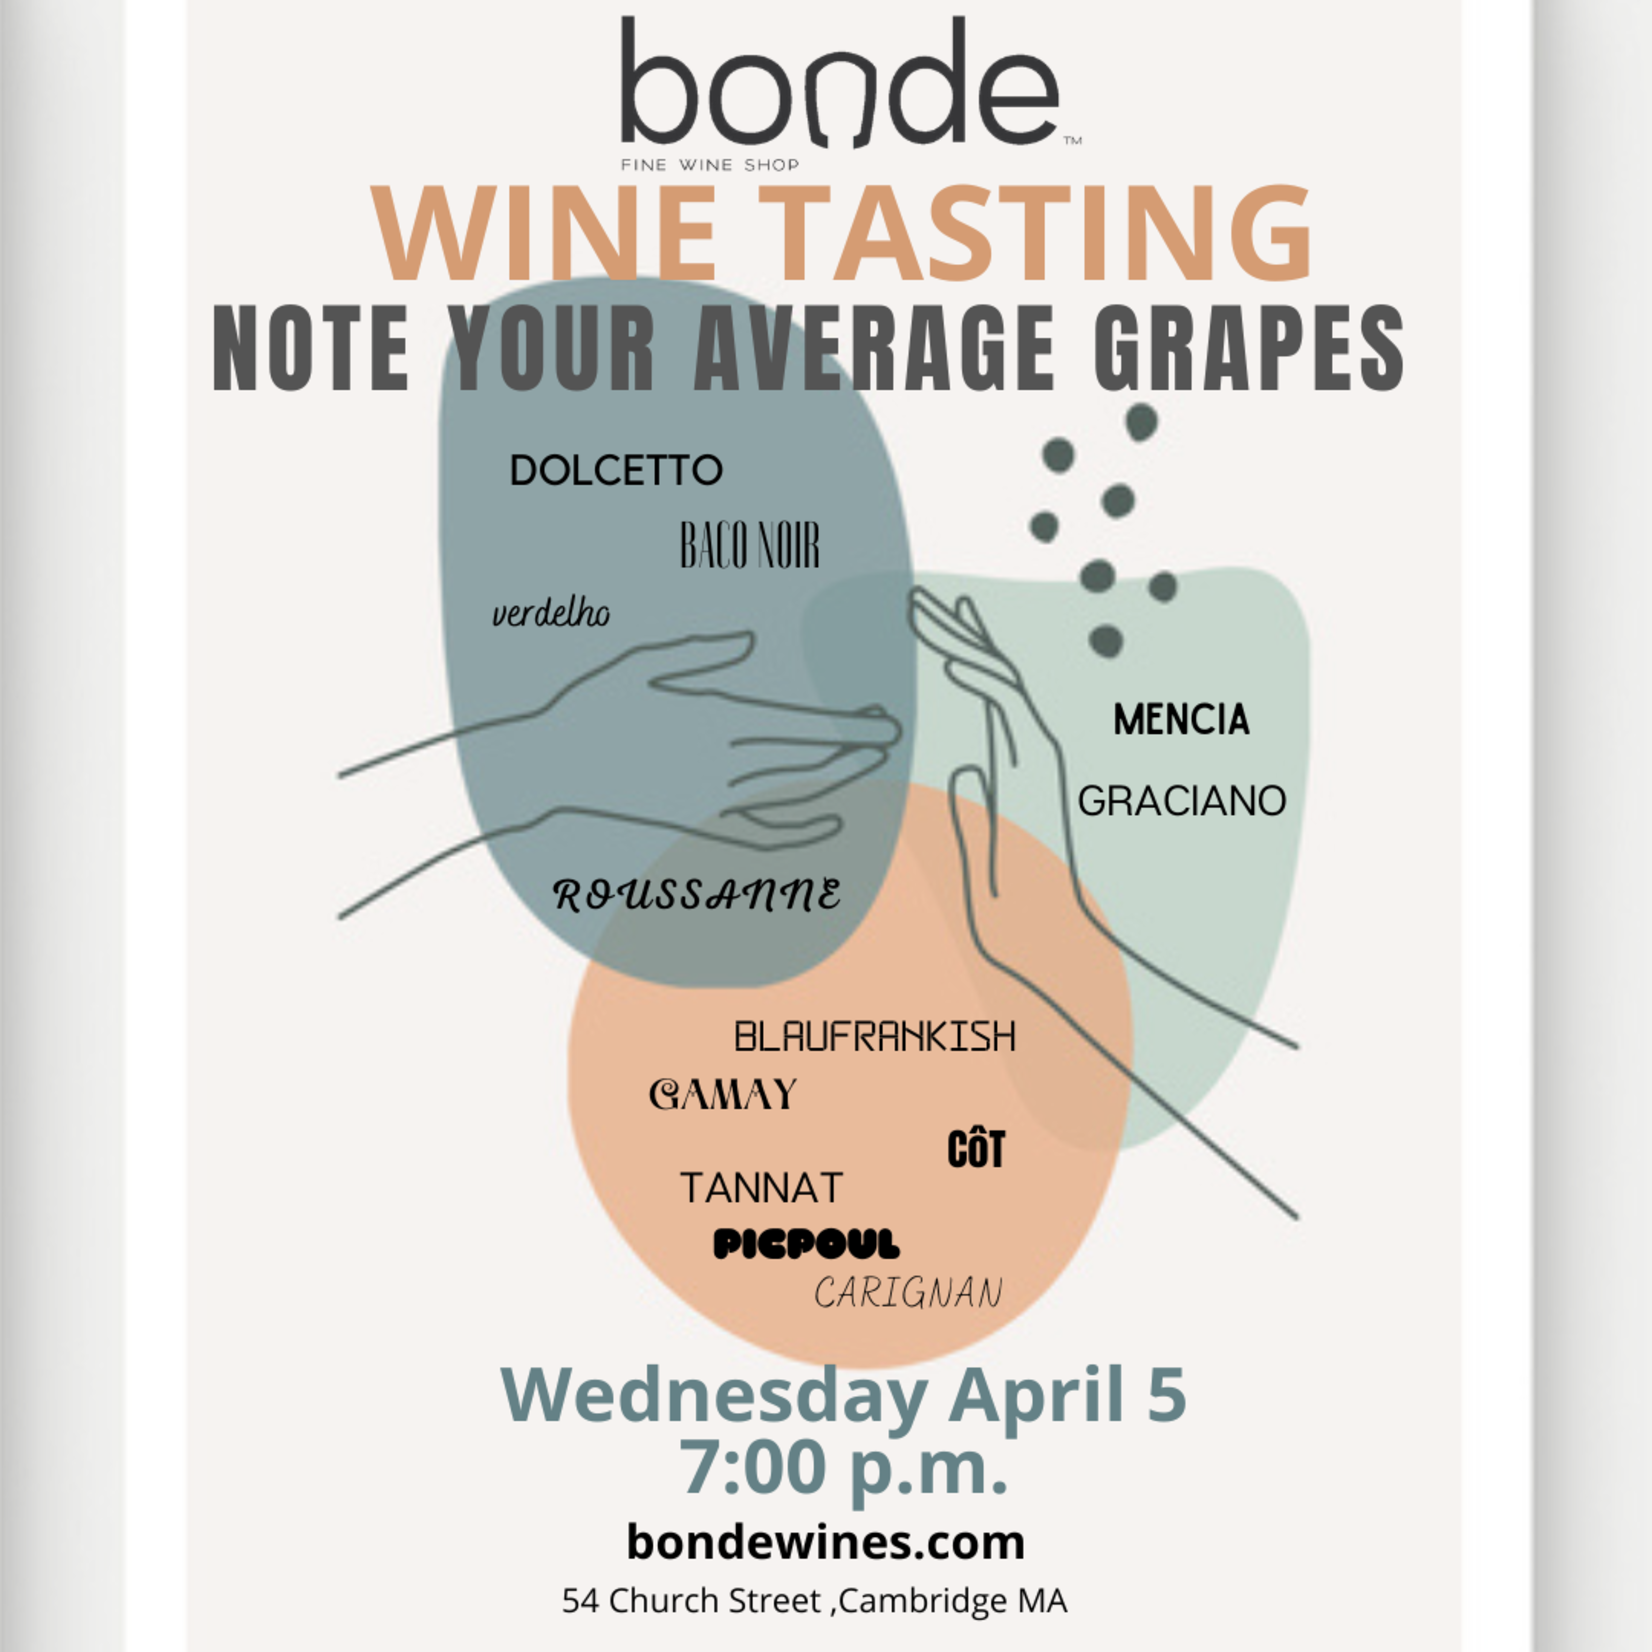 Not Your Average Grapes - Wine Tasting & Class - Wednesday April 5, 7:00 p.m.